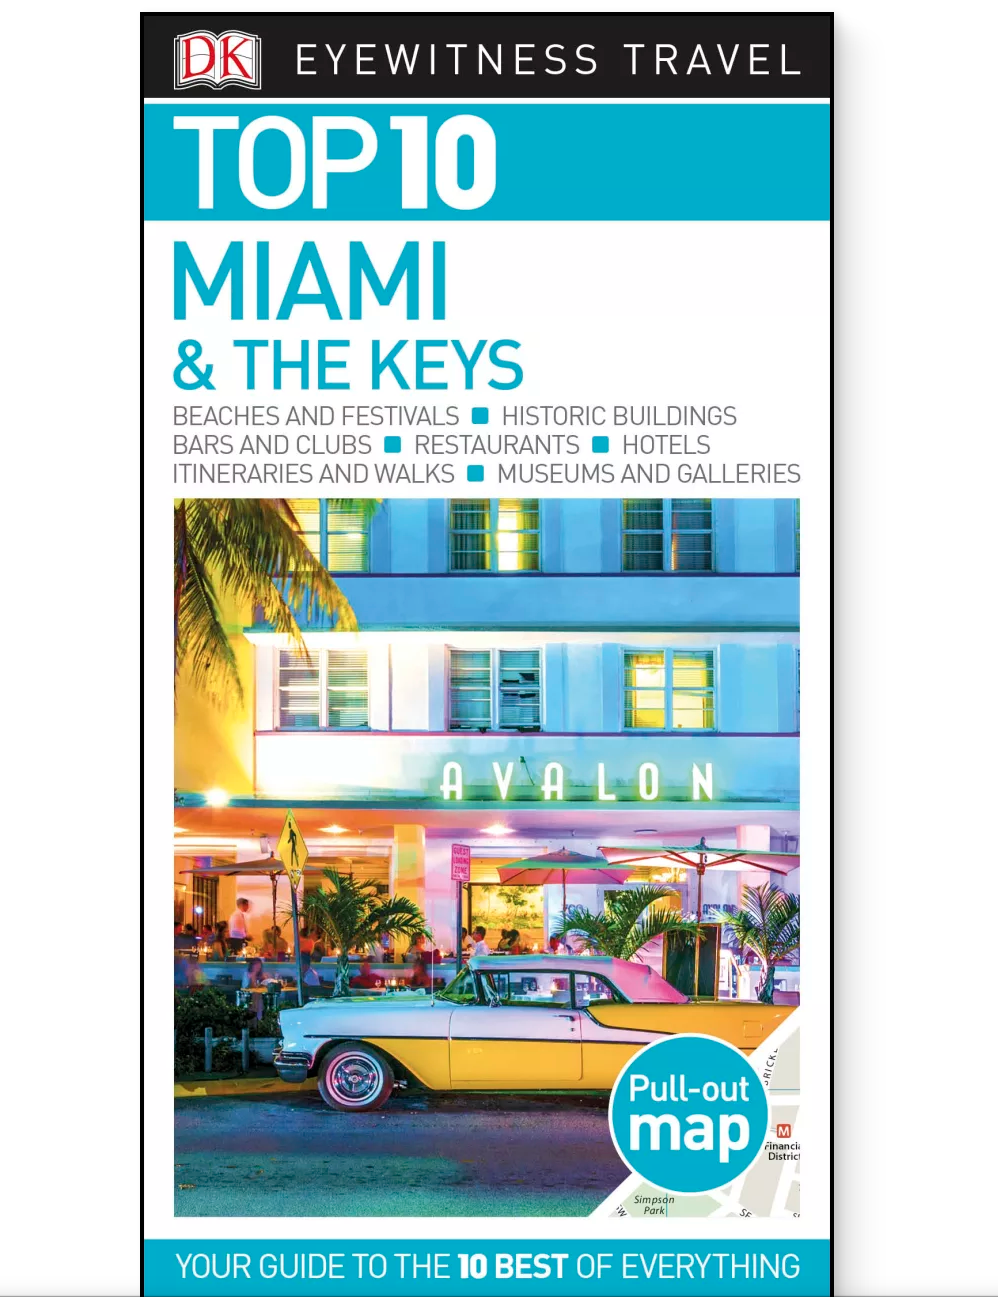 The publisher of DK’s Miami guide has apologized for its description of the Coconut Grove area. (Photo: DK Eyewitness Travel)